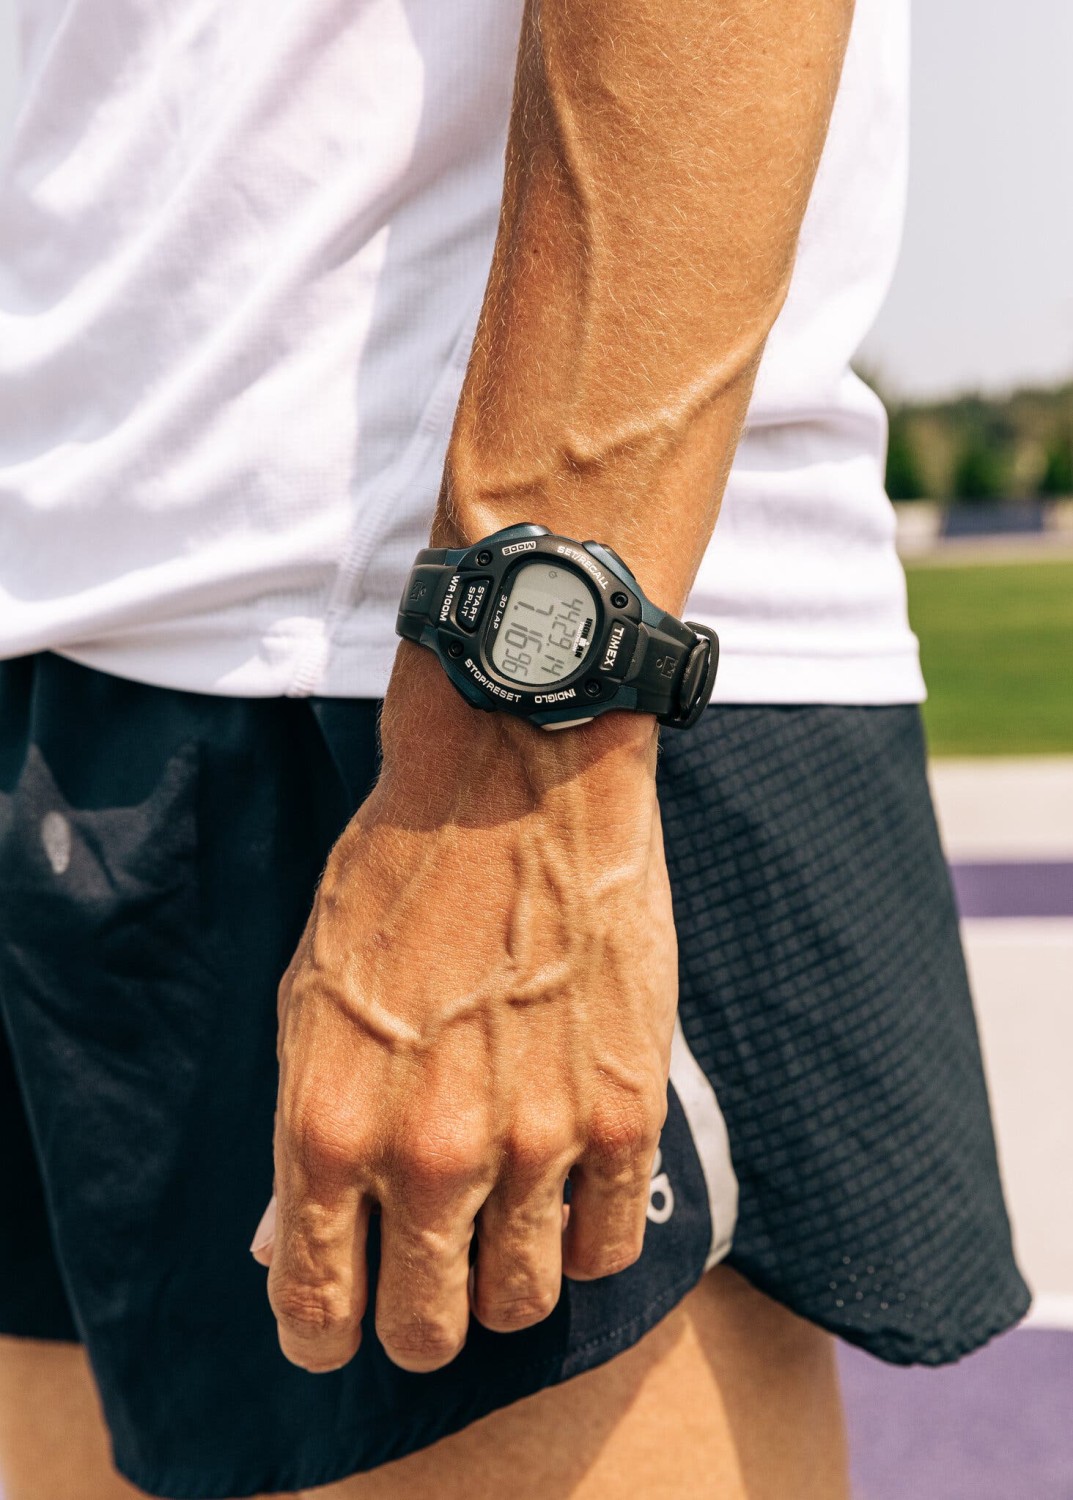 GPS watches have become a training must for most runners, so why do some go old-school with simple vintage watches or even go without?Credit...David Jaewon Oh for The New York Times